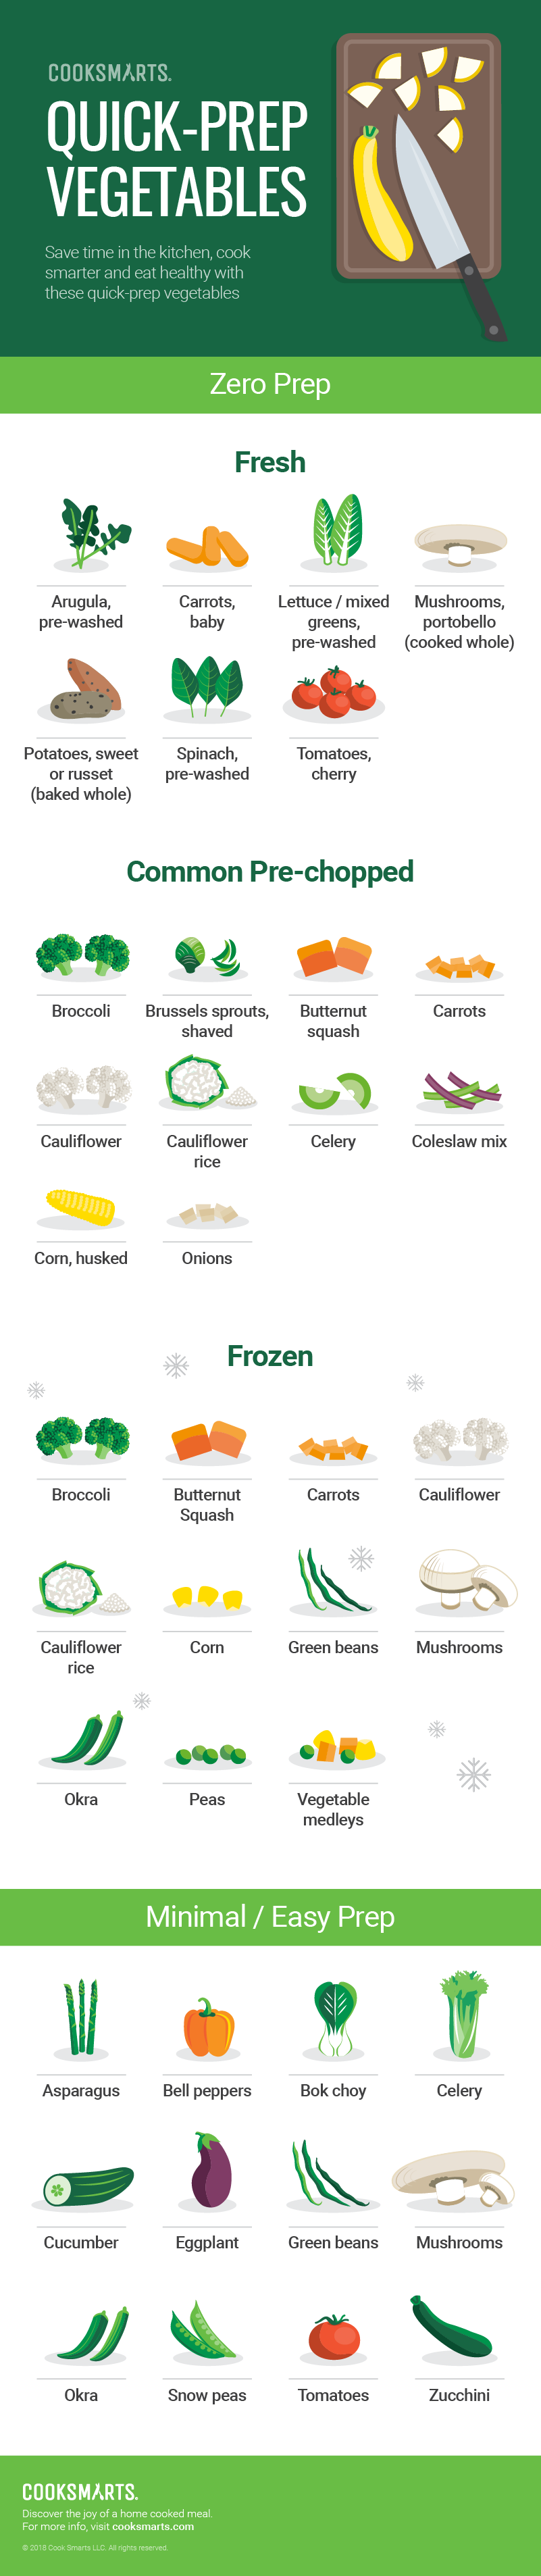 Cook Smarts' List of Quick-Prep Vegetables #infographic